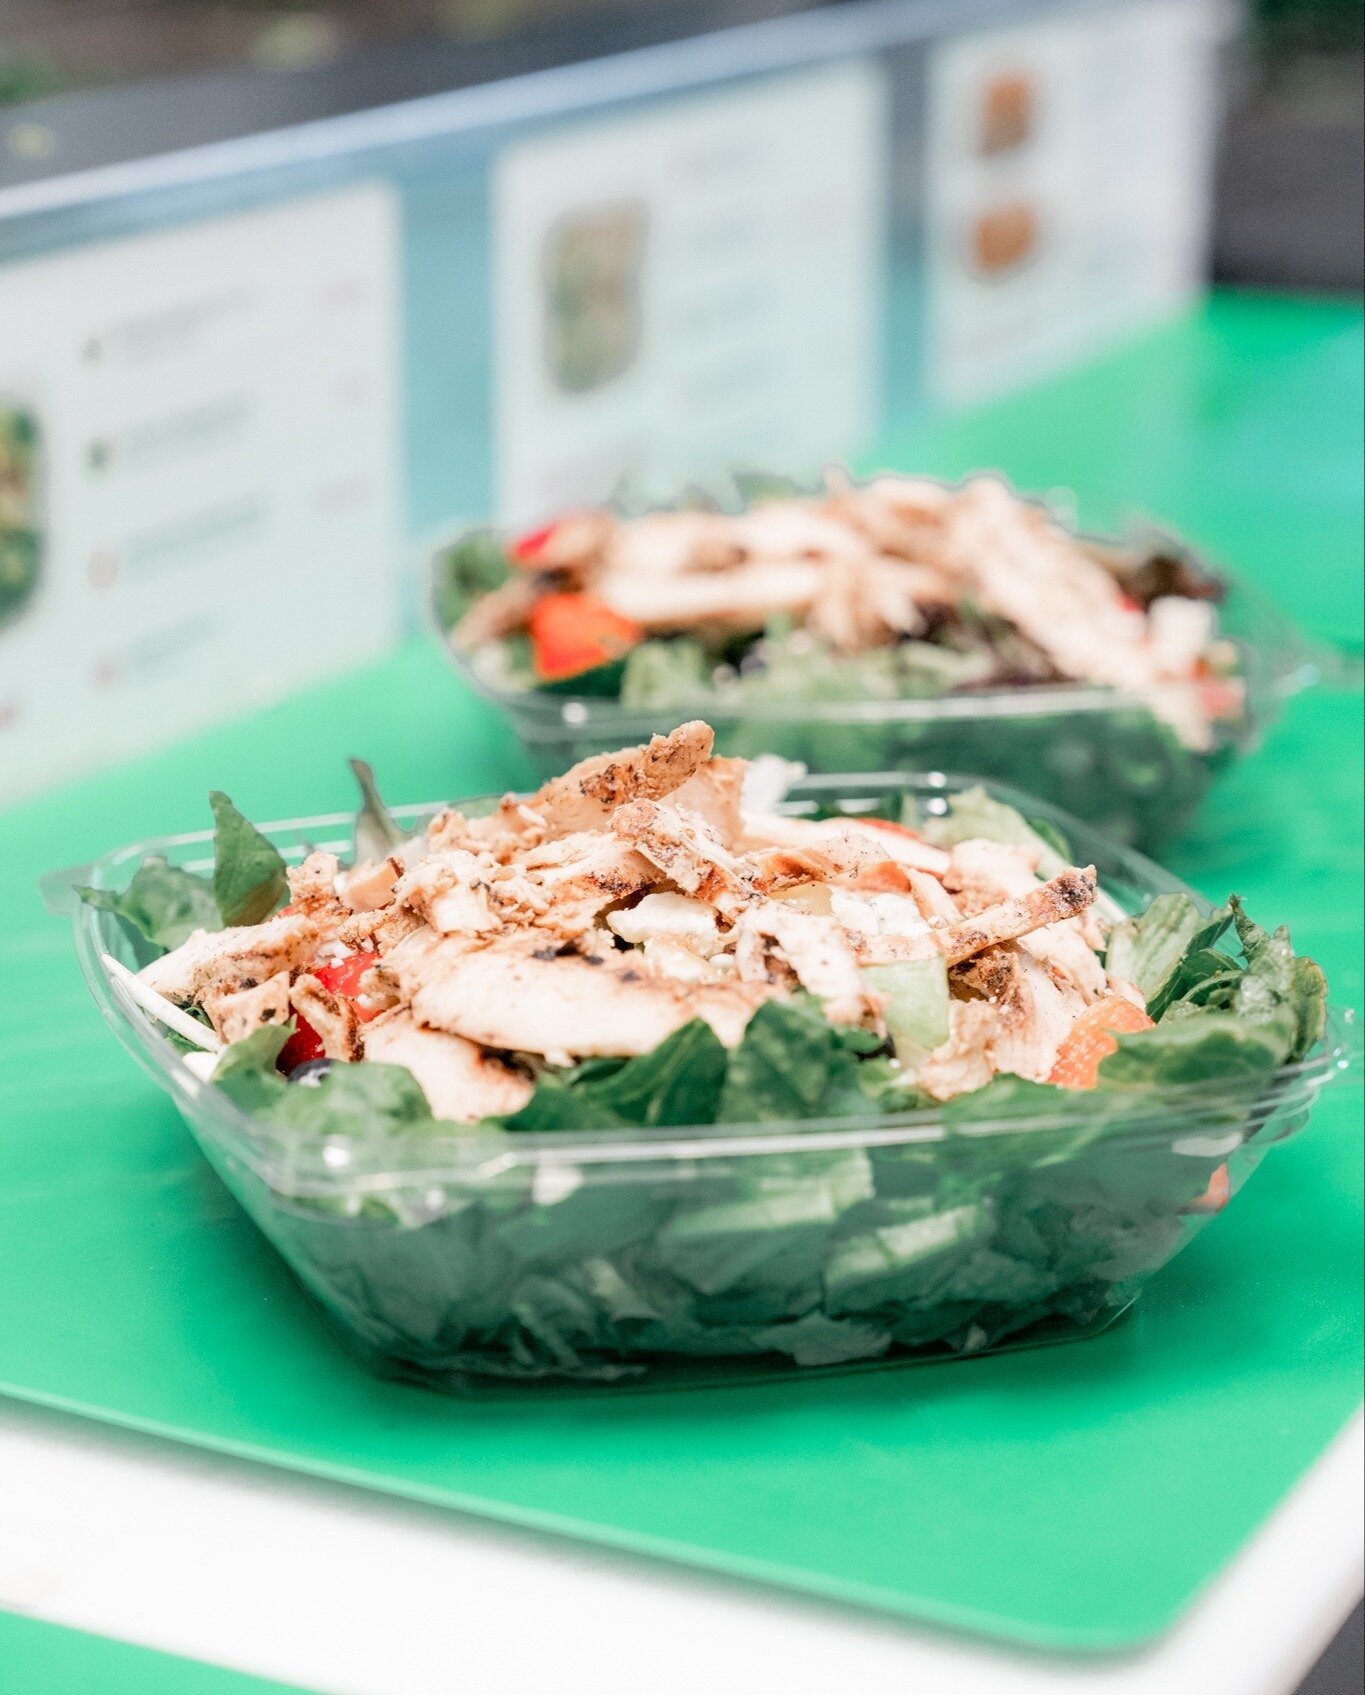 Enjoy a freshly packed and customized Market Salad made just for you! Ordering is easy through the app - simply tap to elevate your lunch plans with a delicious and satisfying blend of sweet and savory flavors.